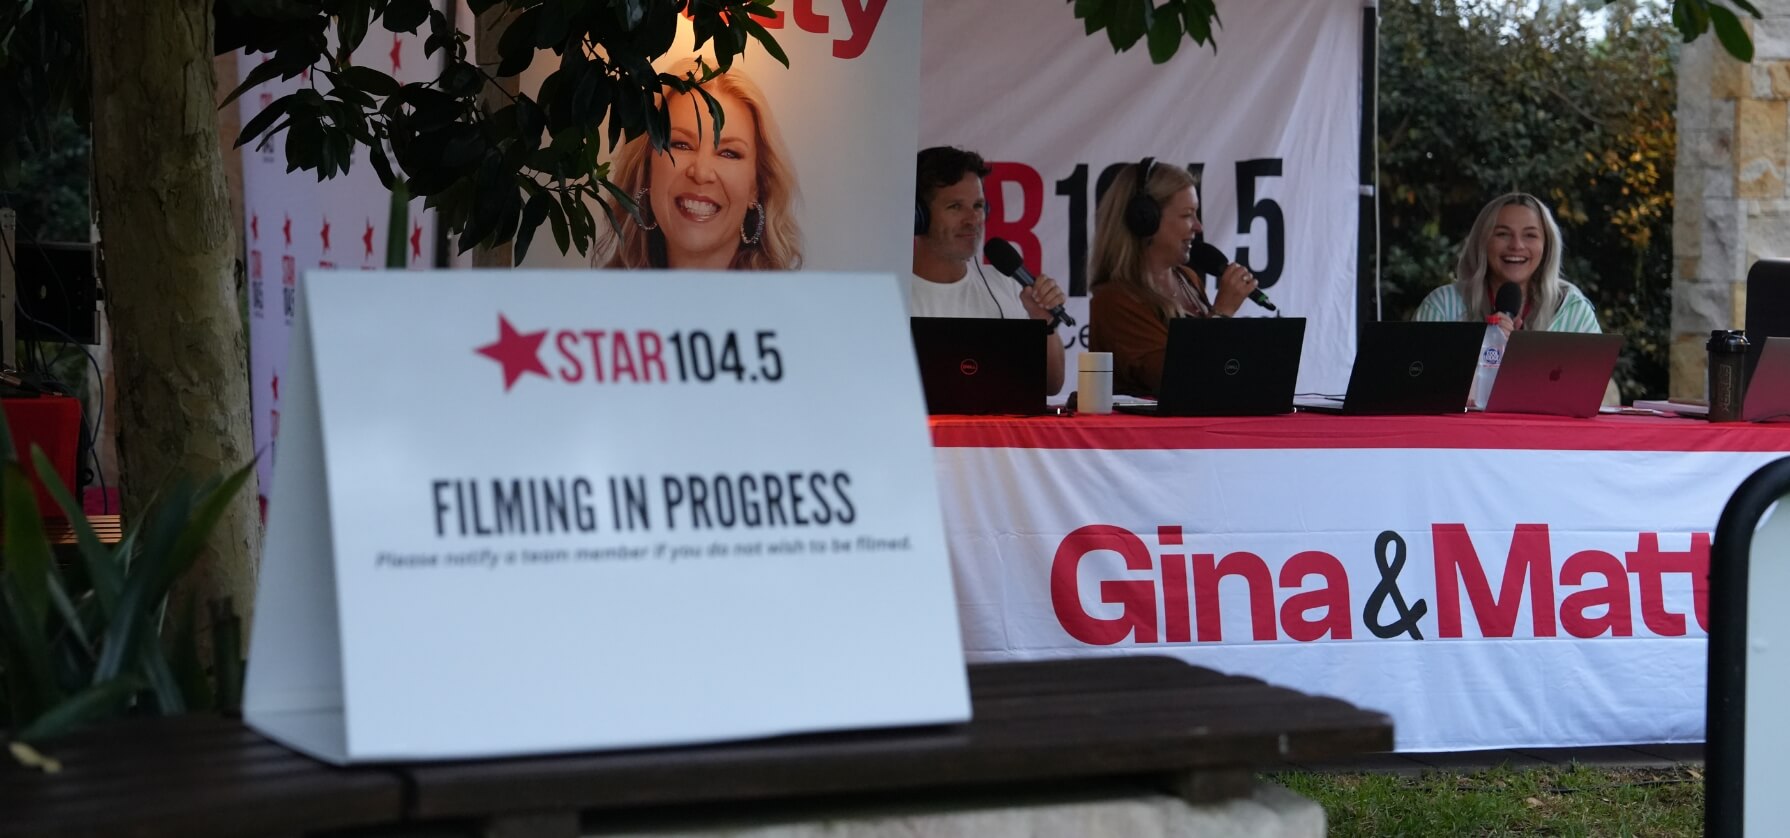 Gina & Matty from Star104.5 broadcasting live from our campus